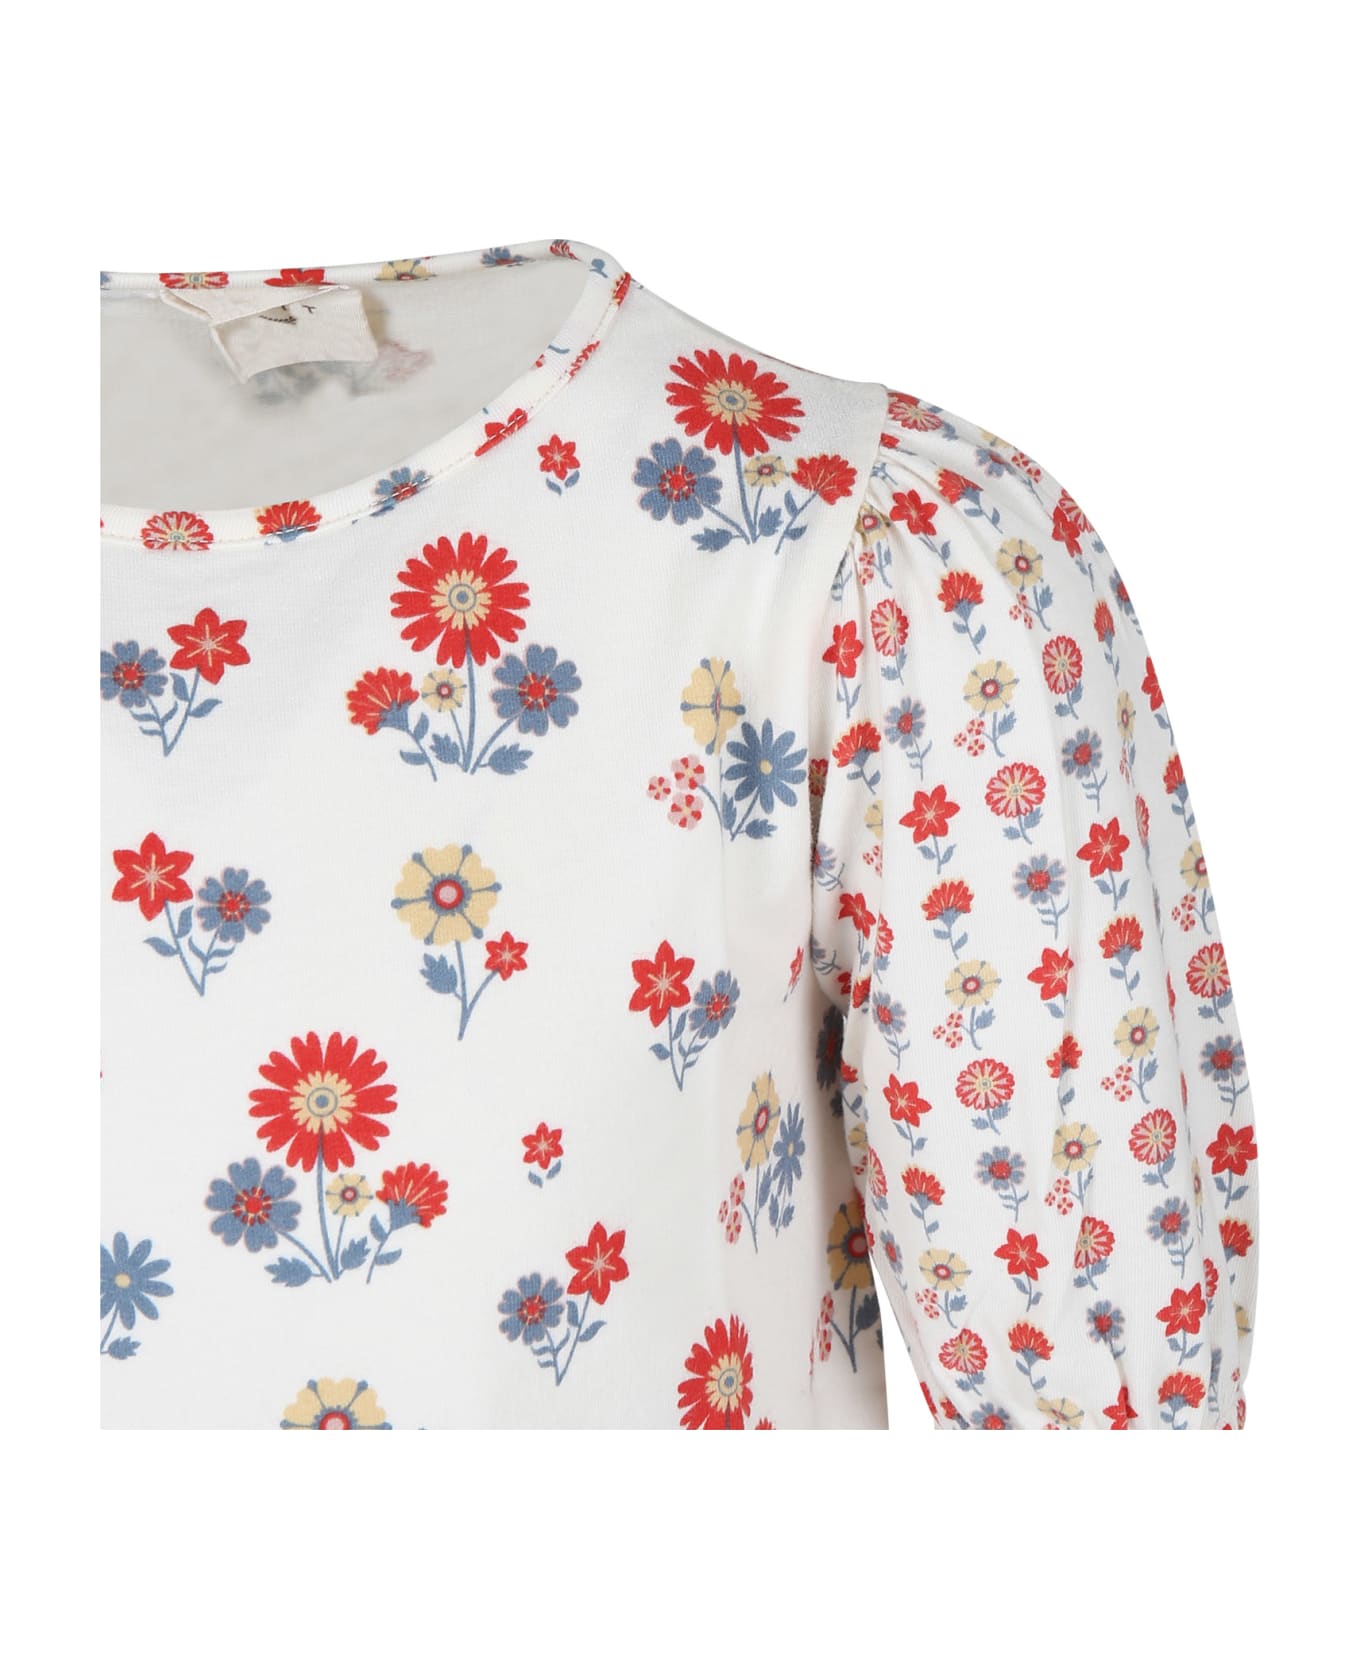 Coco Au Lait Ivory Top For Girl With Flowers Print - Ivory